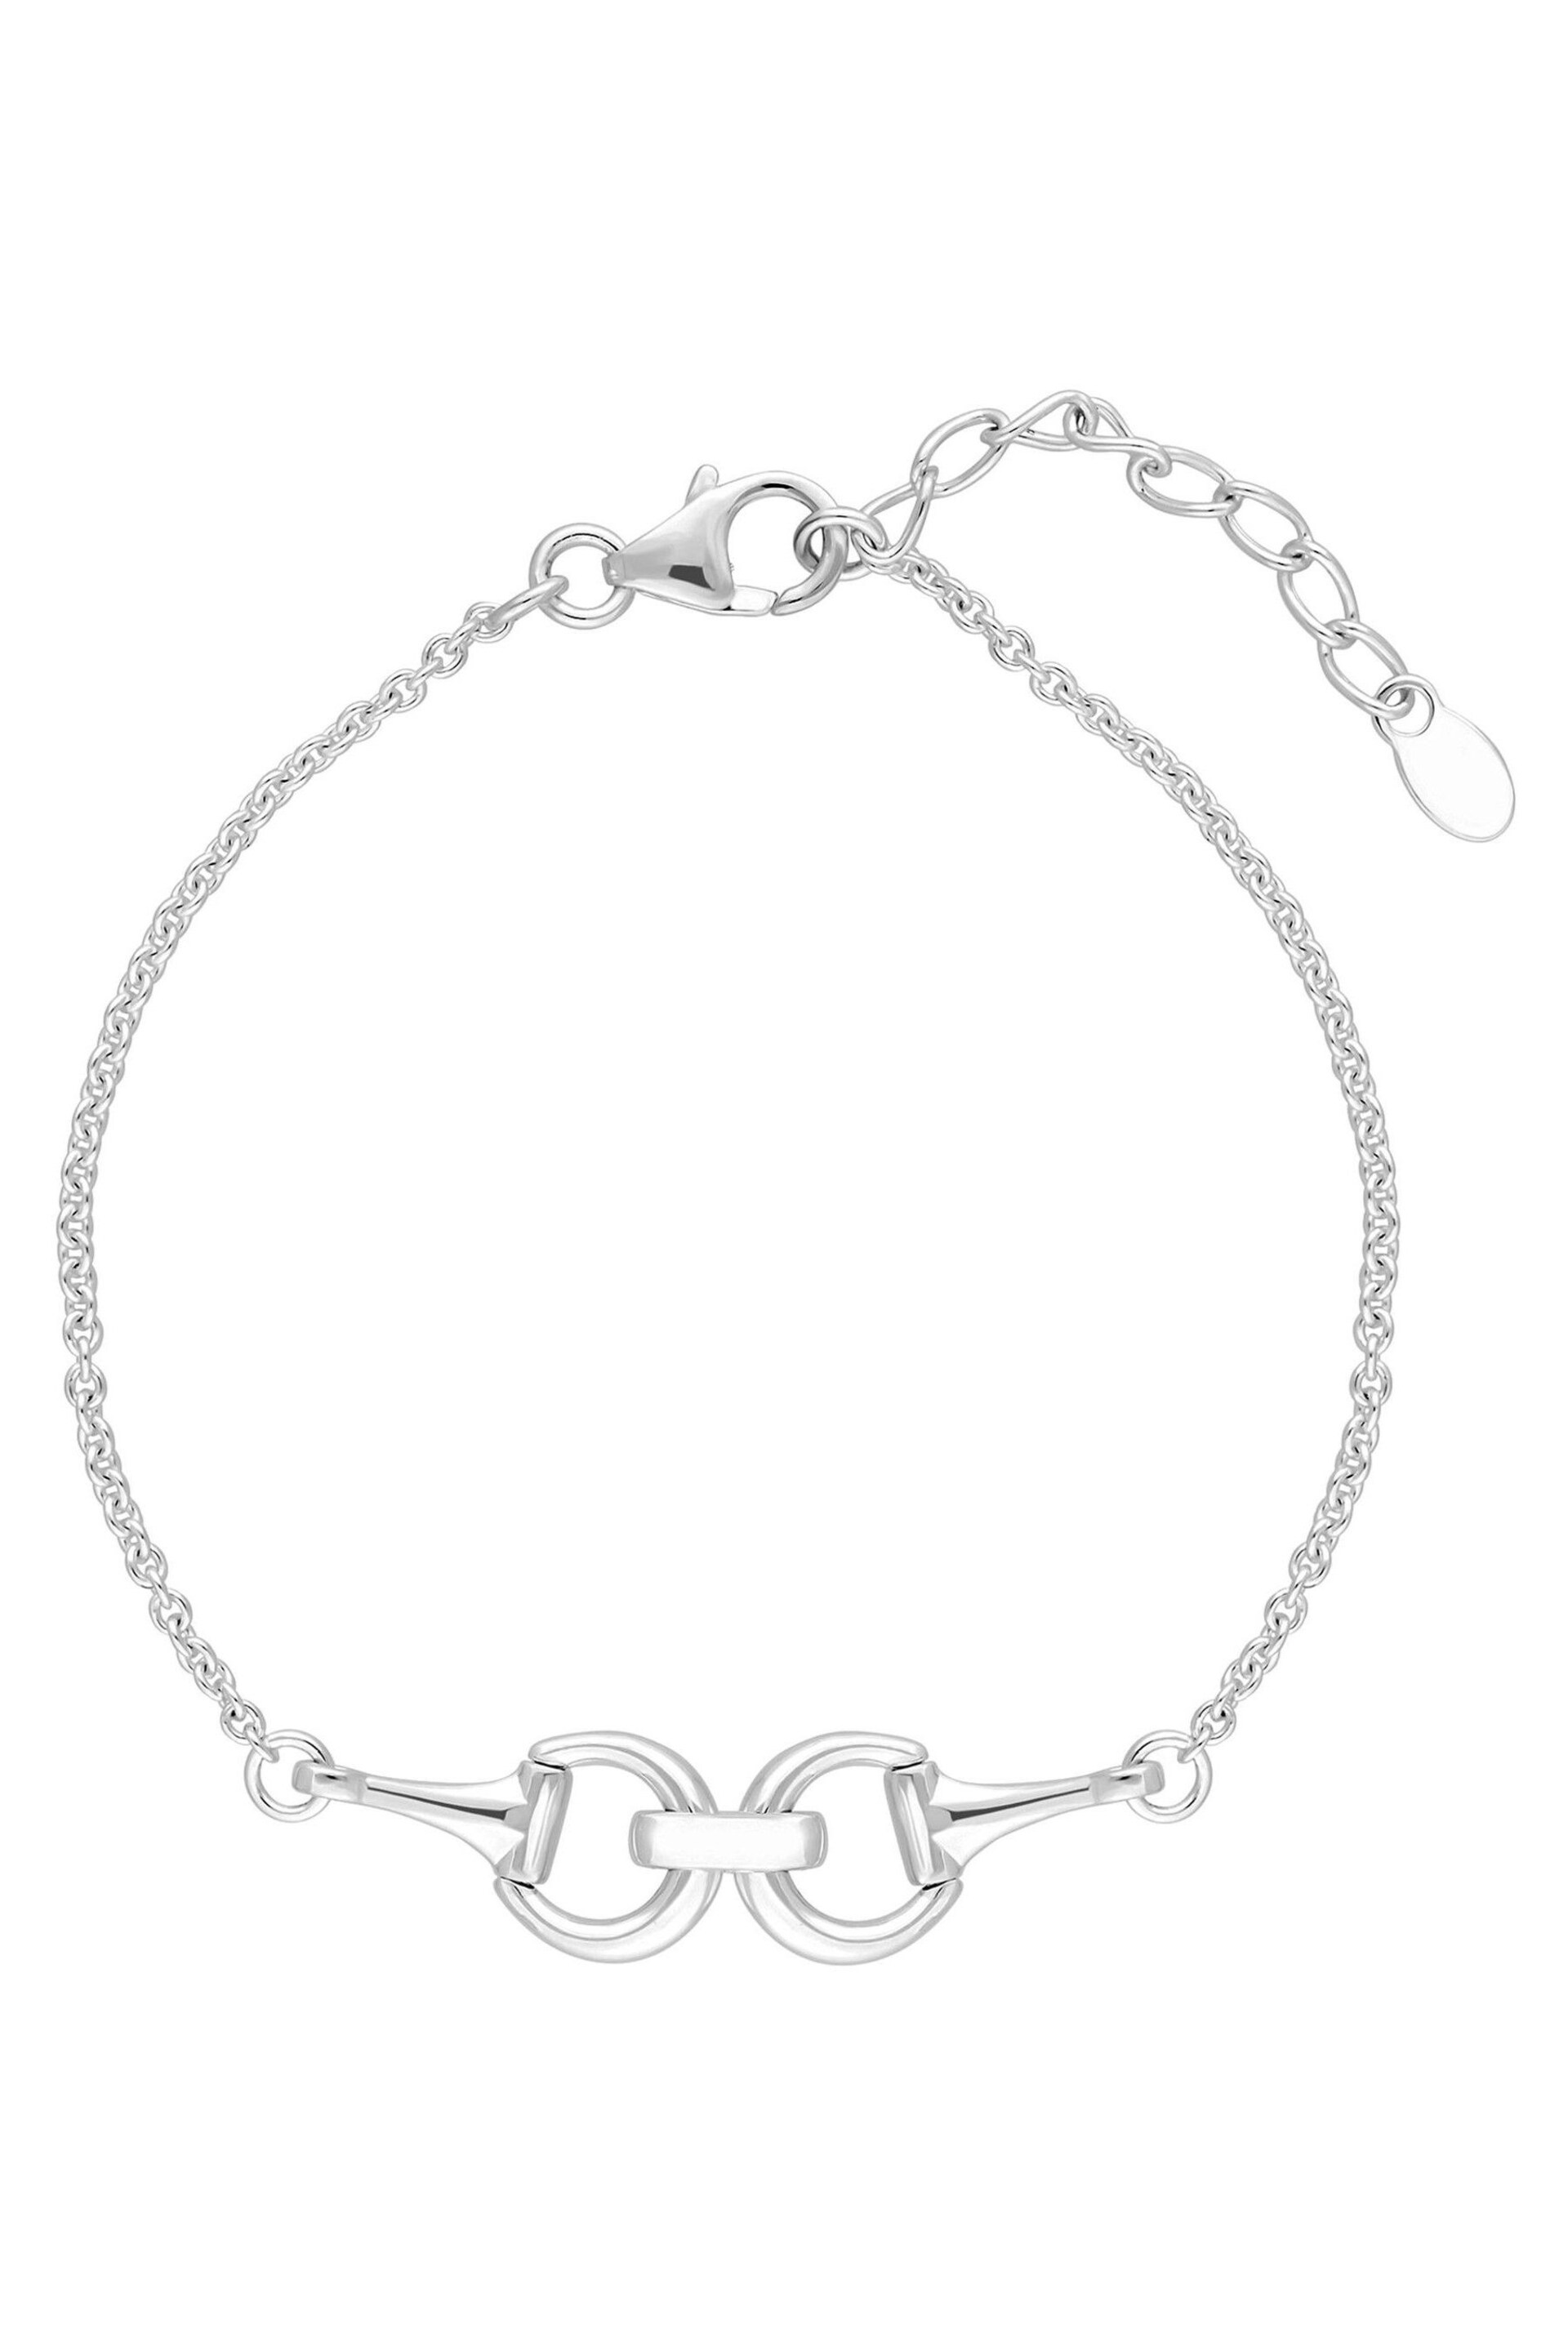 Simply Silver Sterling Silver Tone 925 Cubic Zirconia Snaffle Bracelet - Image 1 of 3